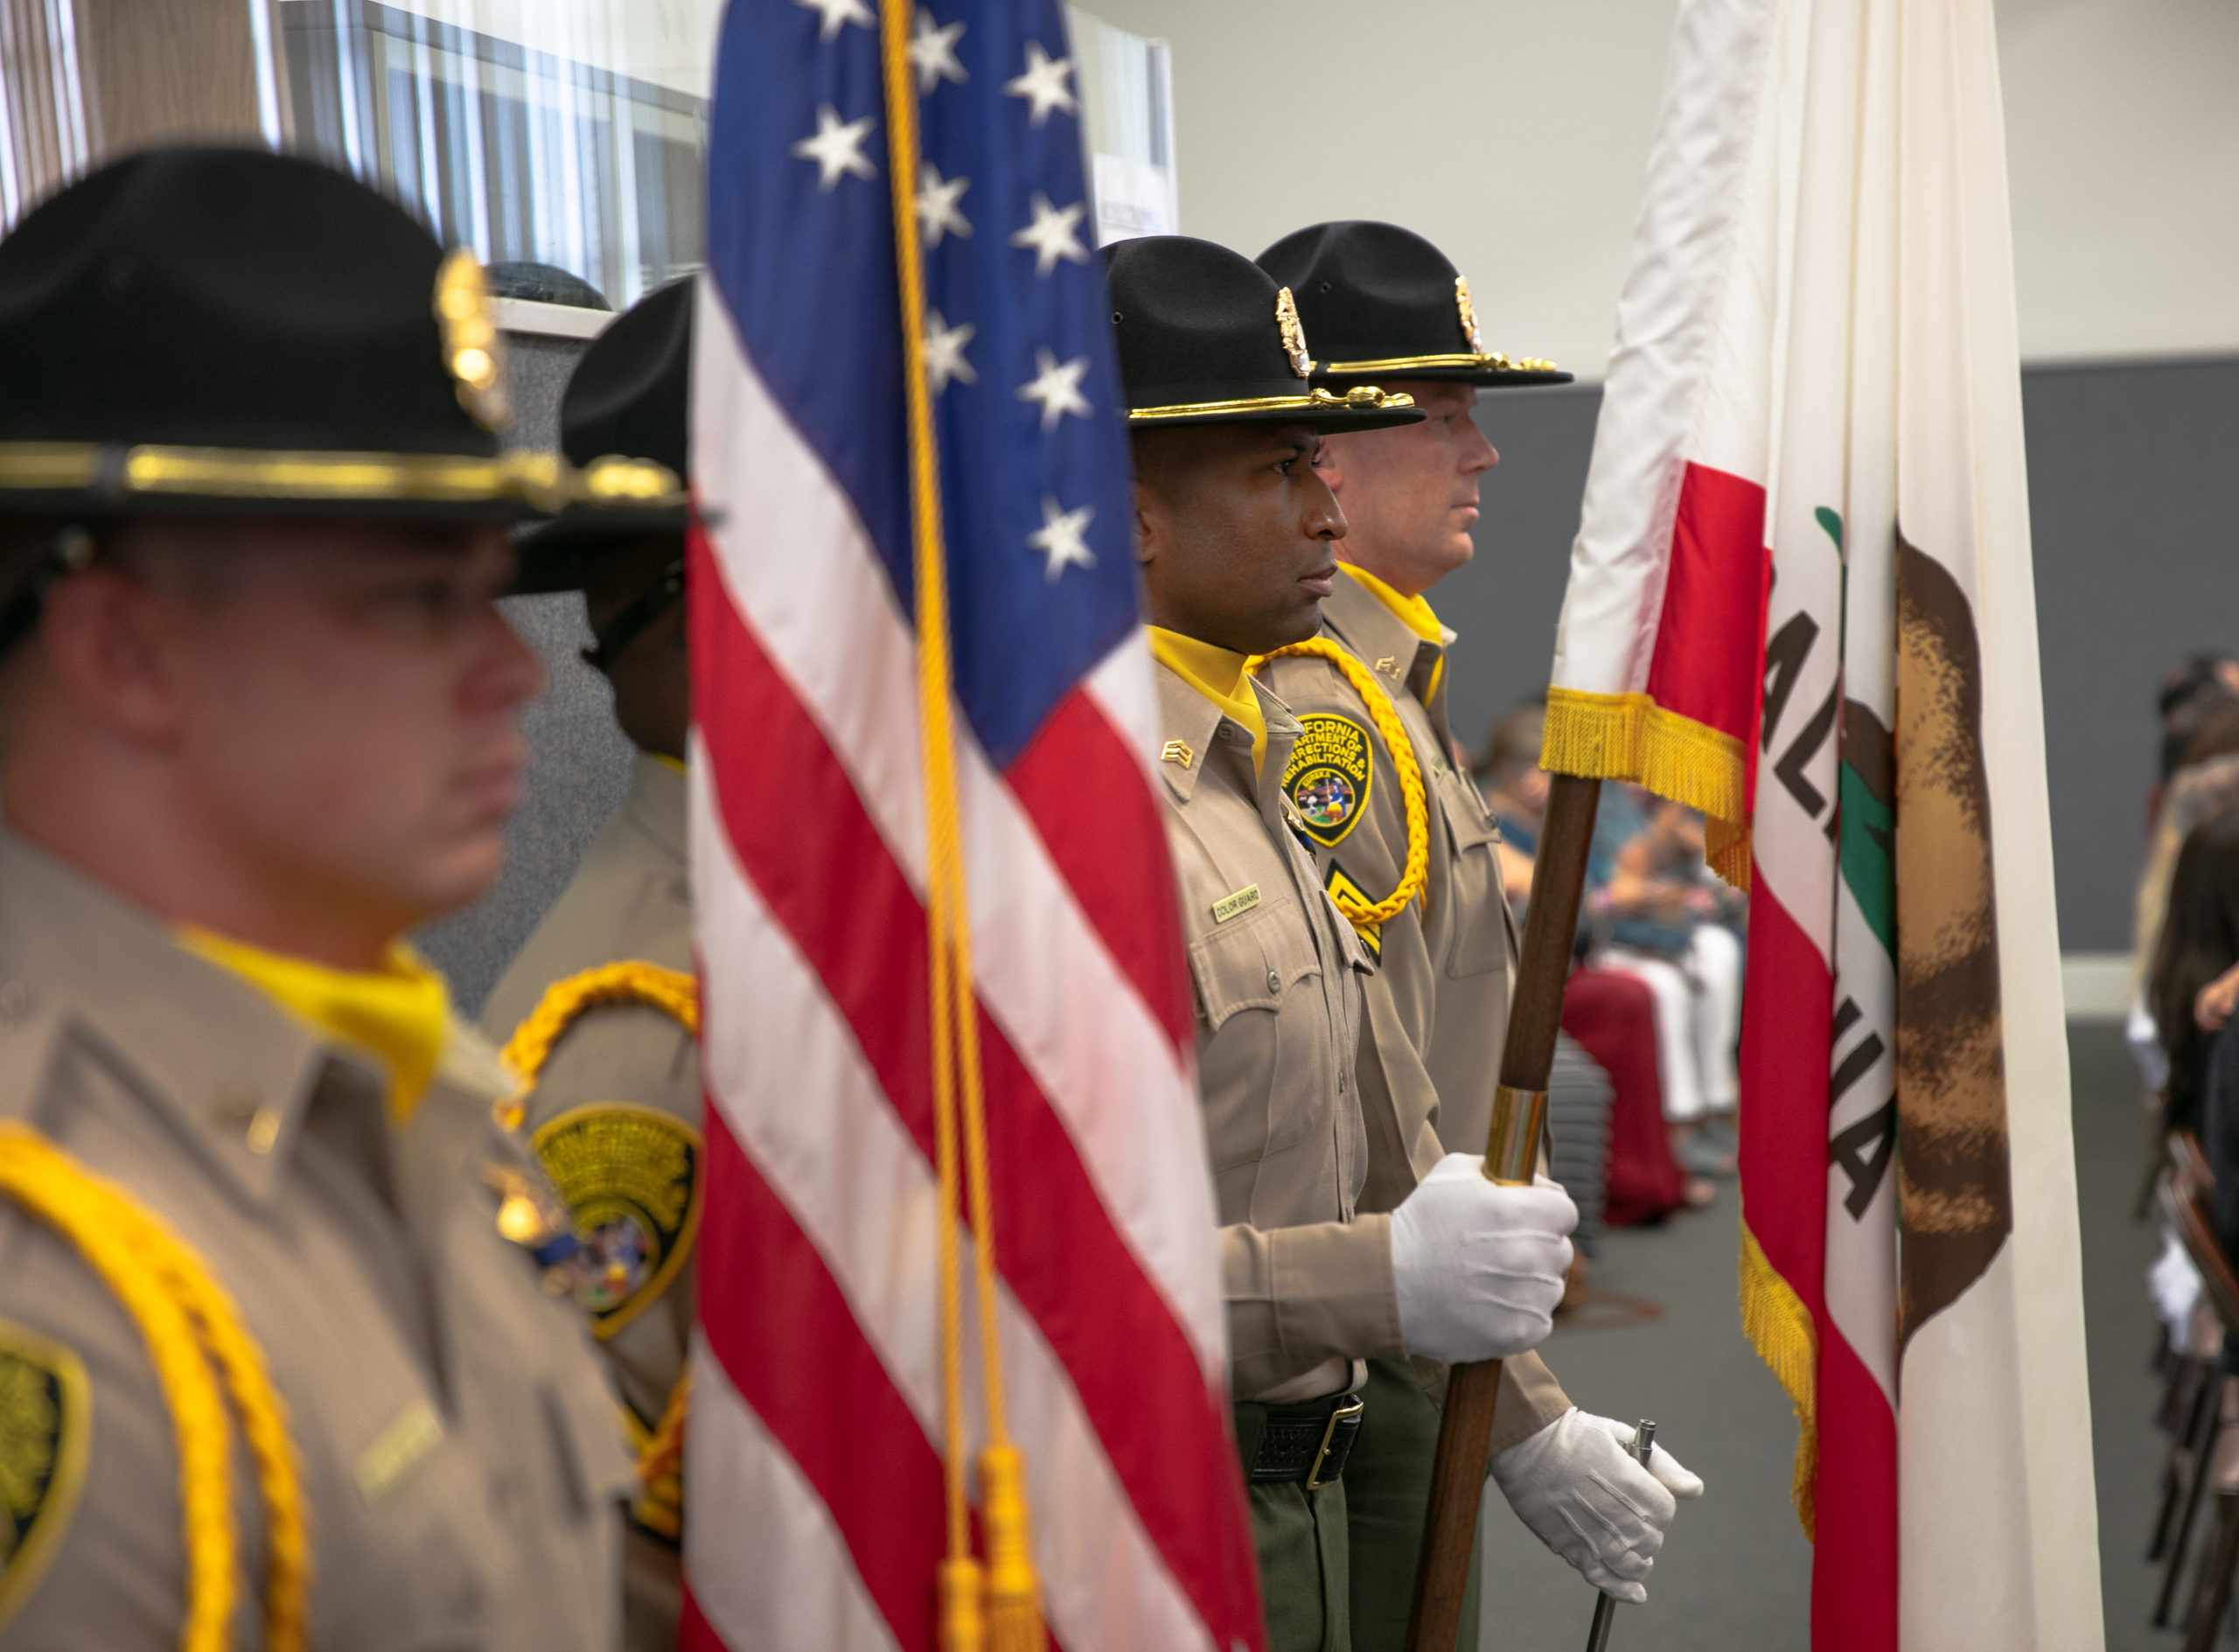 CDCR Sergeants standing at attention at a graduation ceremony.